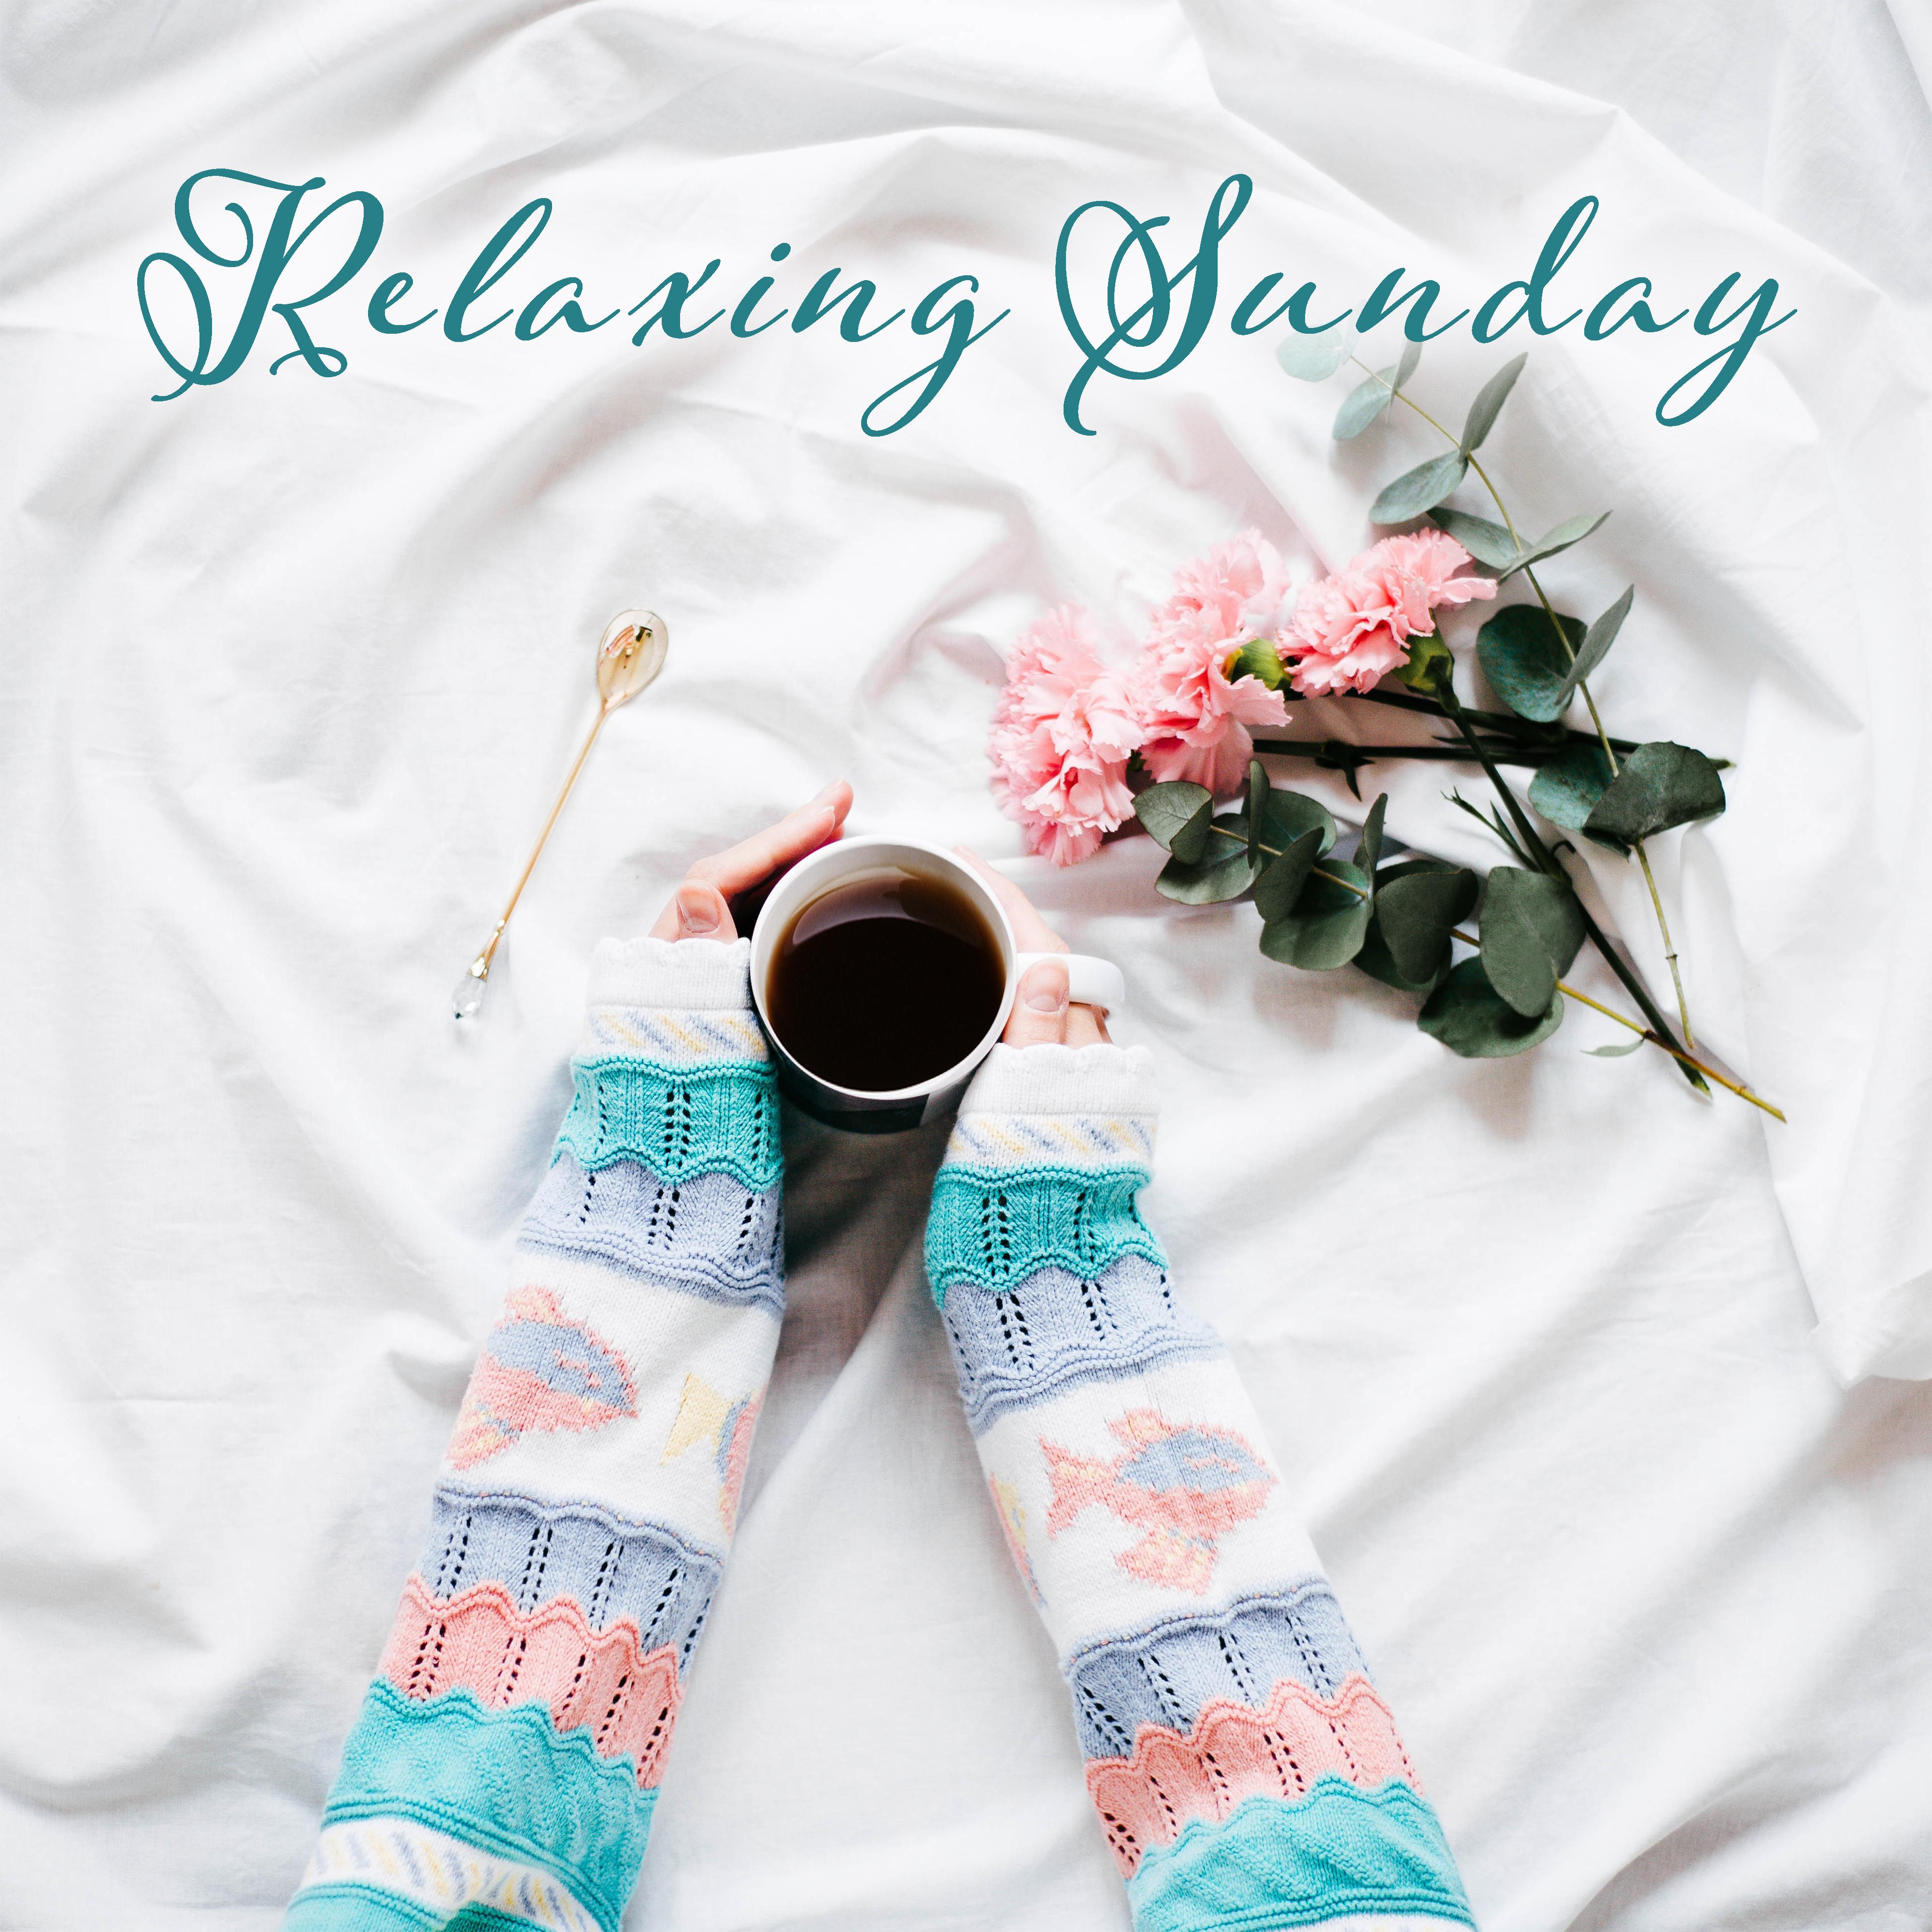 Relaxing Sunday  Calming Jazz, Peaceful Melodies to Rest, Soft Jazz at Night, Piano Jazz Music